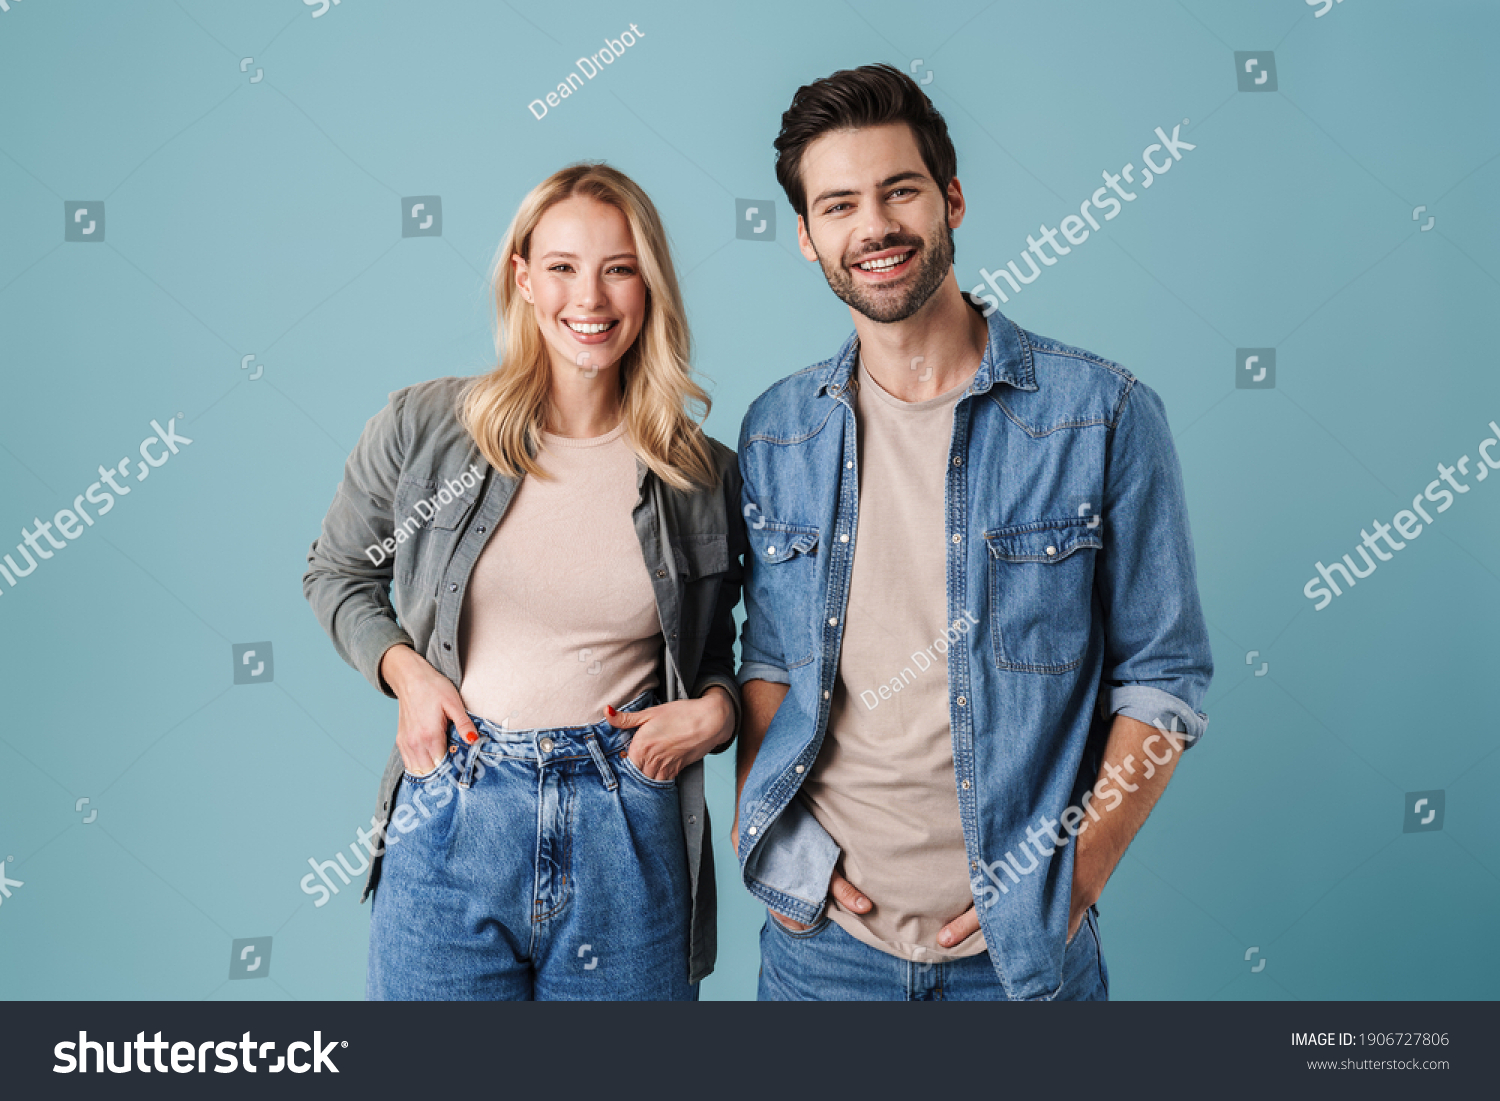 Young beautiful caucasian man and woman smiling and posing at camera isolated over blue background #1906727806